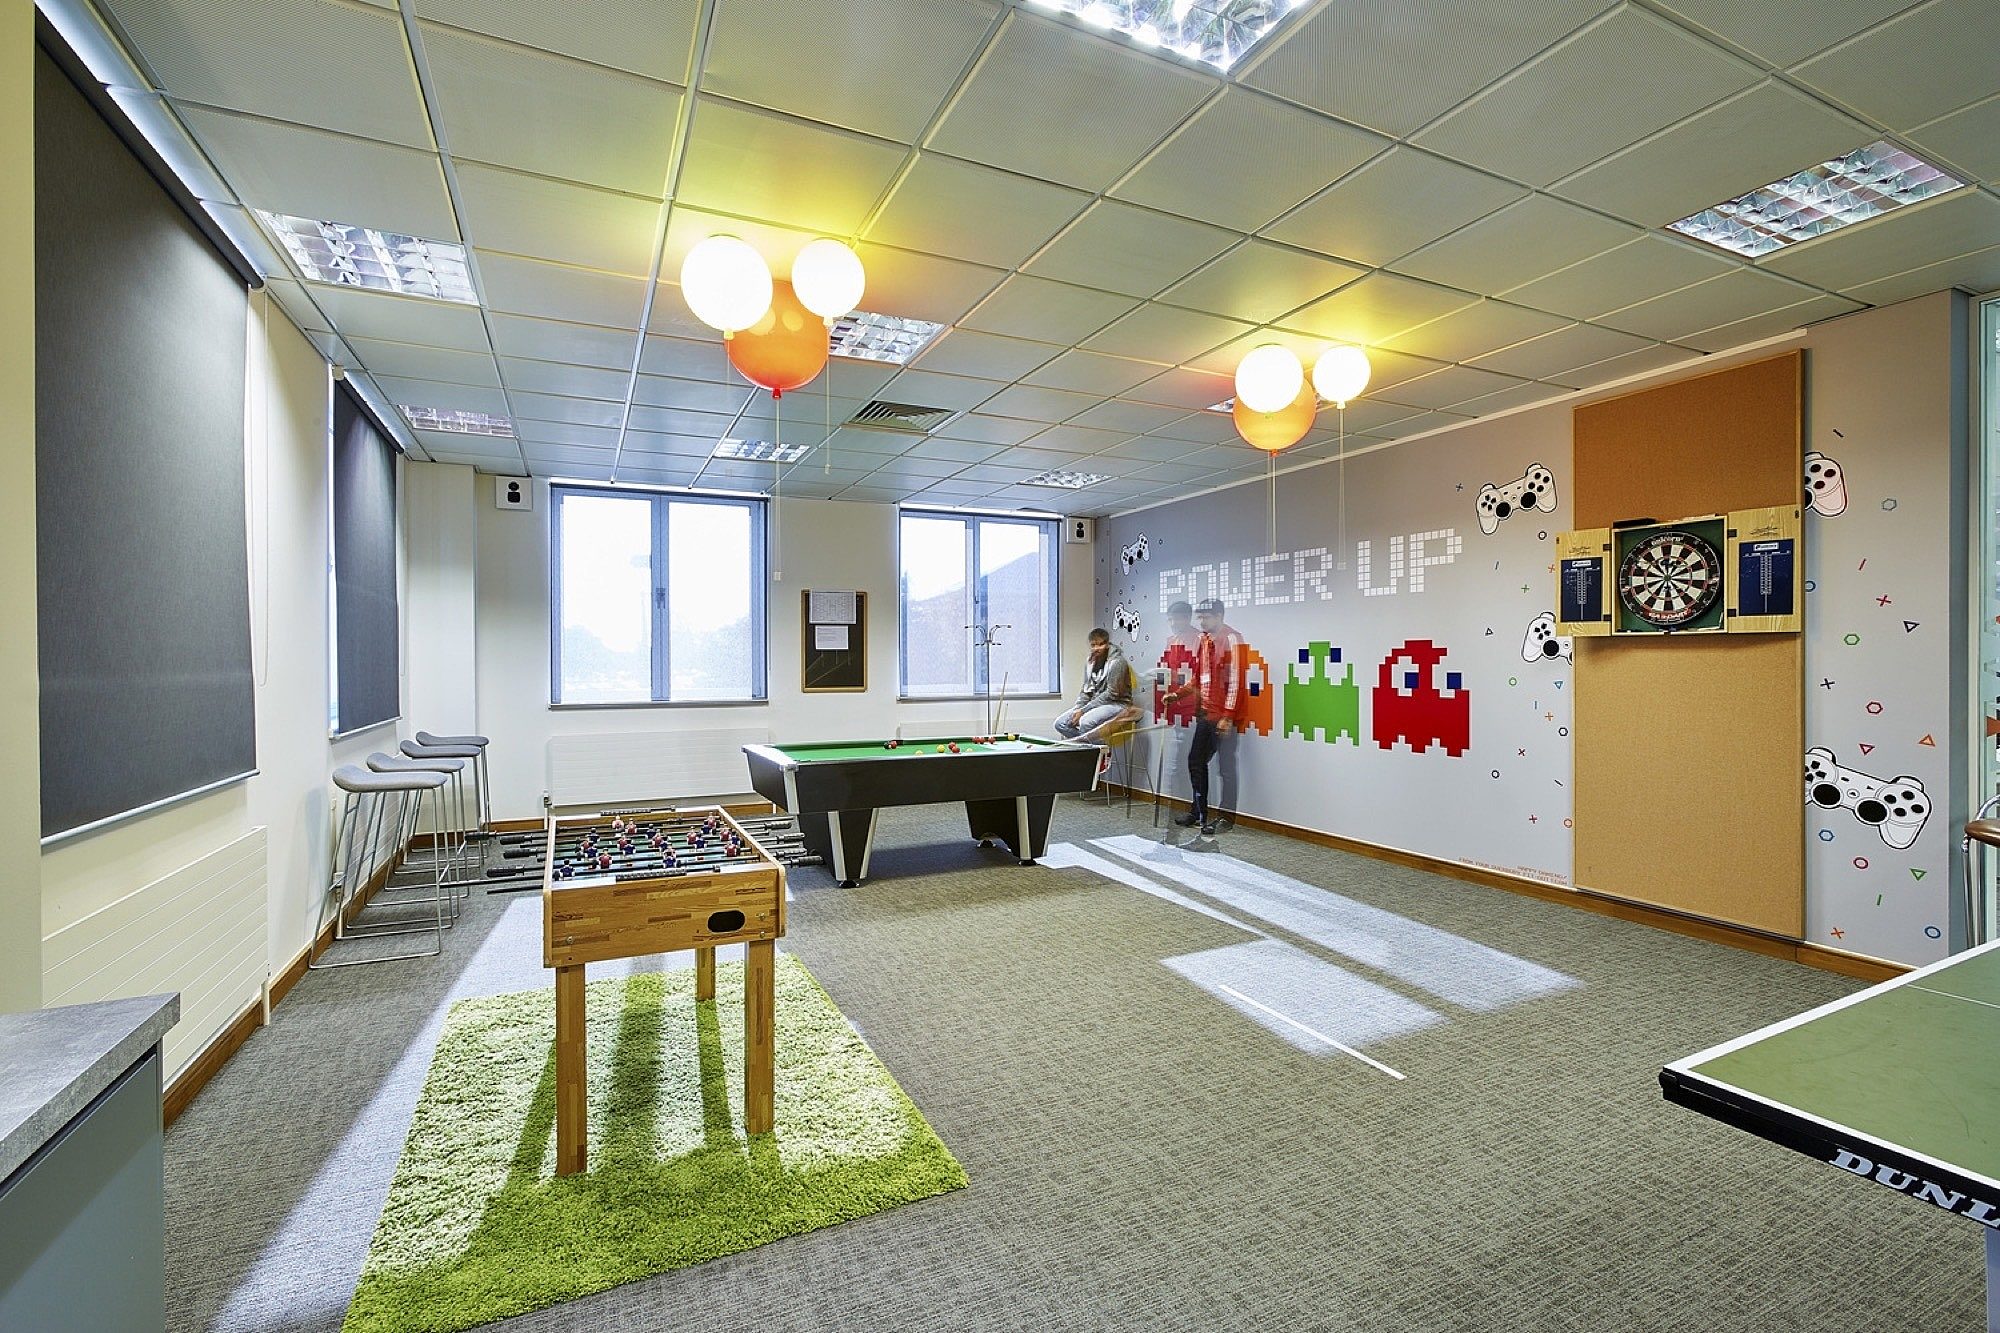 IHG games room in office fit out